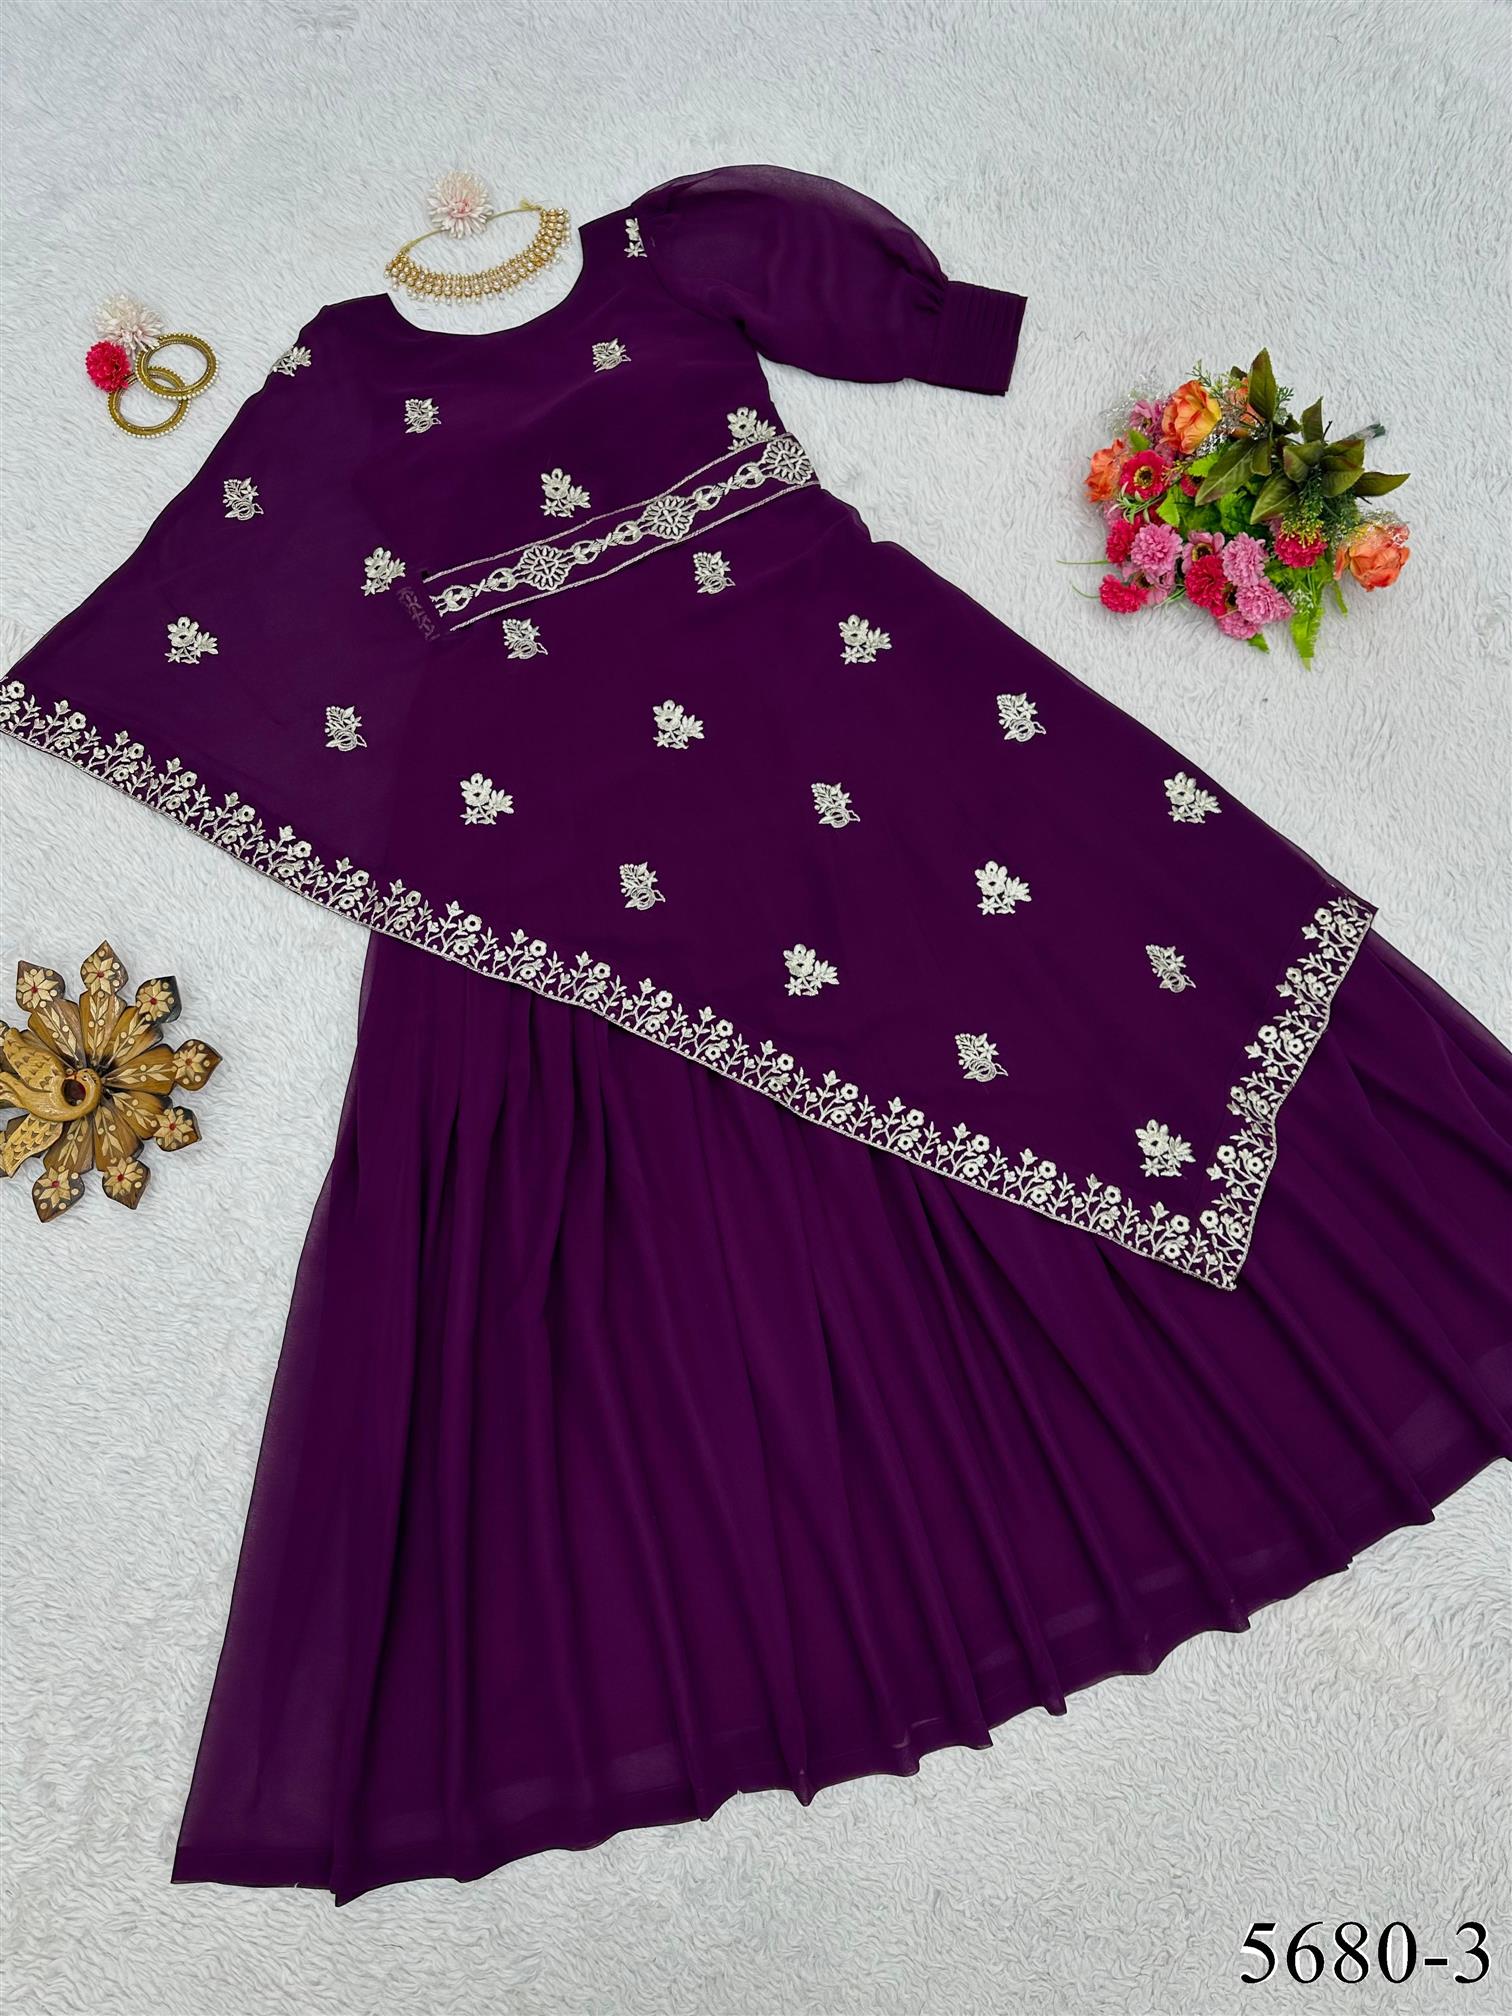 Foux gorgette With Thread Work And Attractive Look